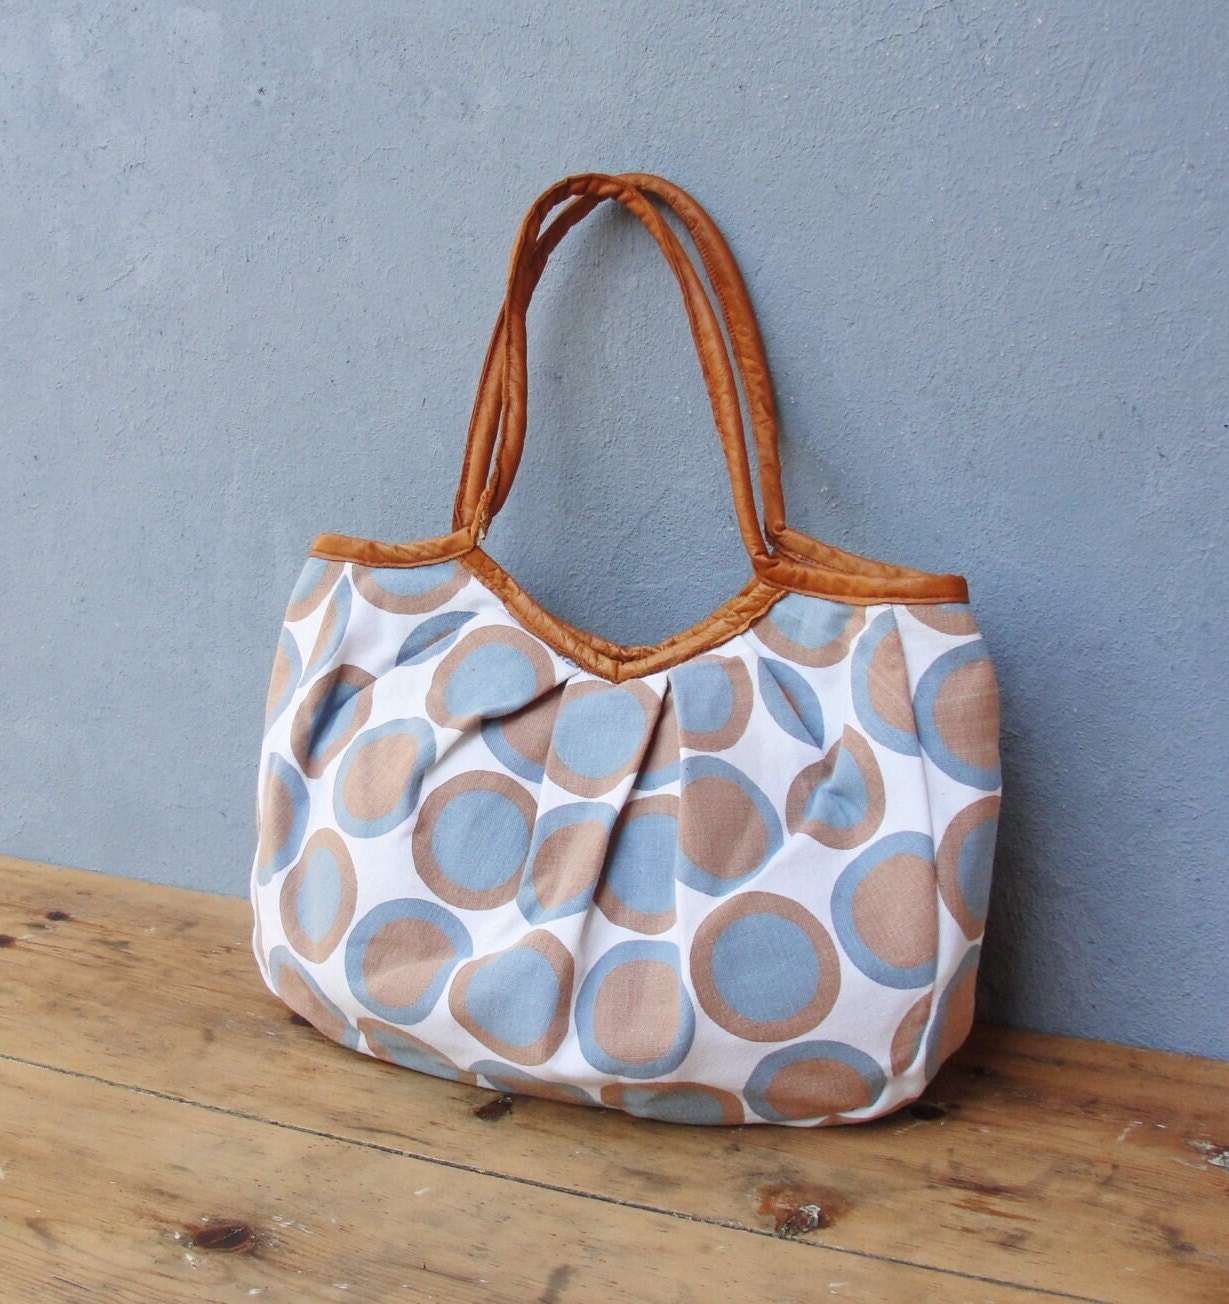 Dotted Linen Bag With Leather Details Hobo Bag - Etsy